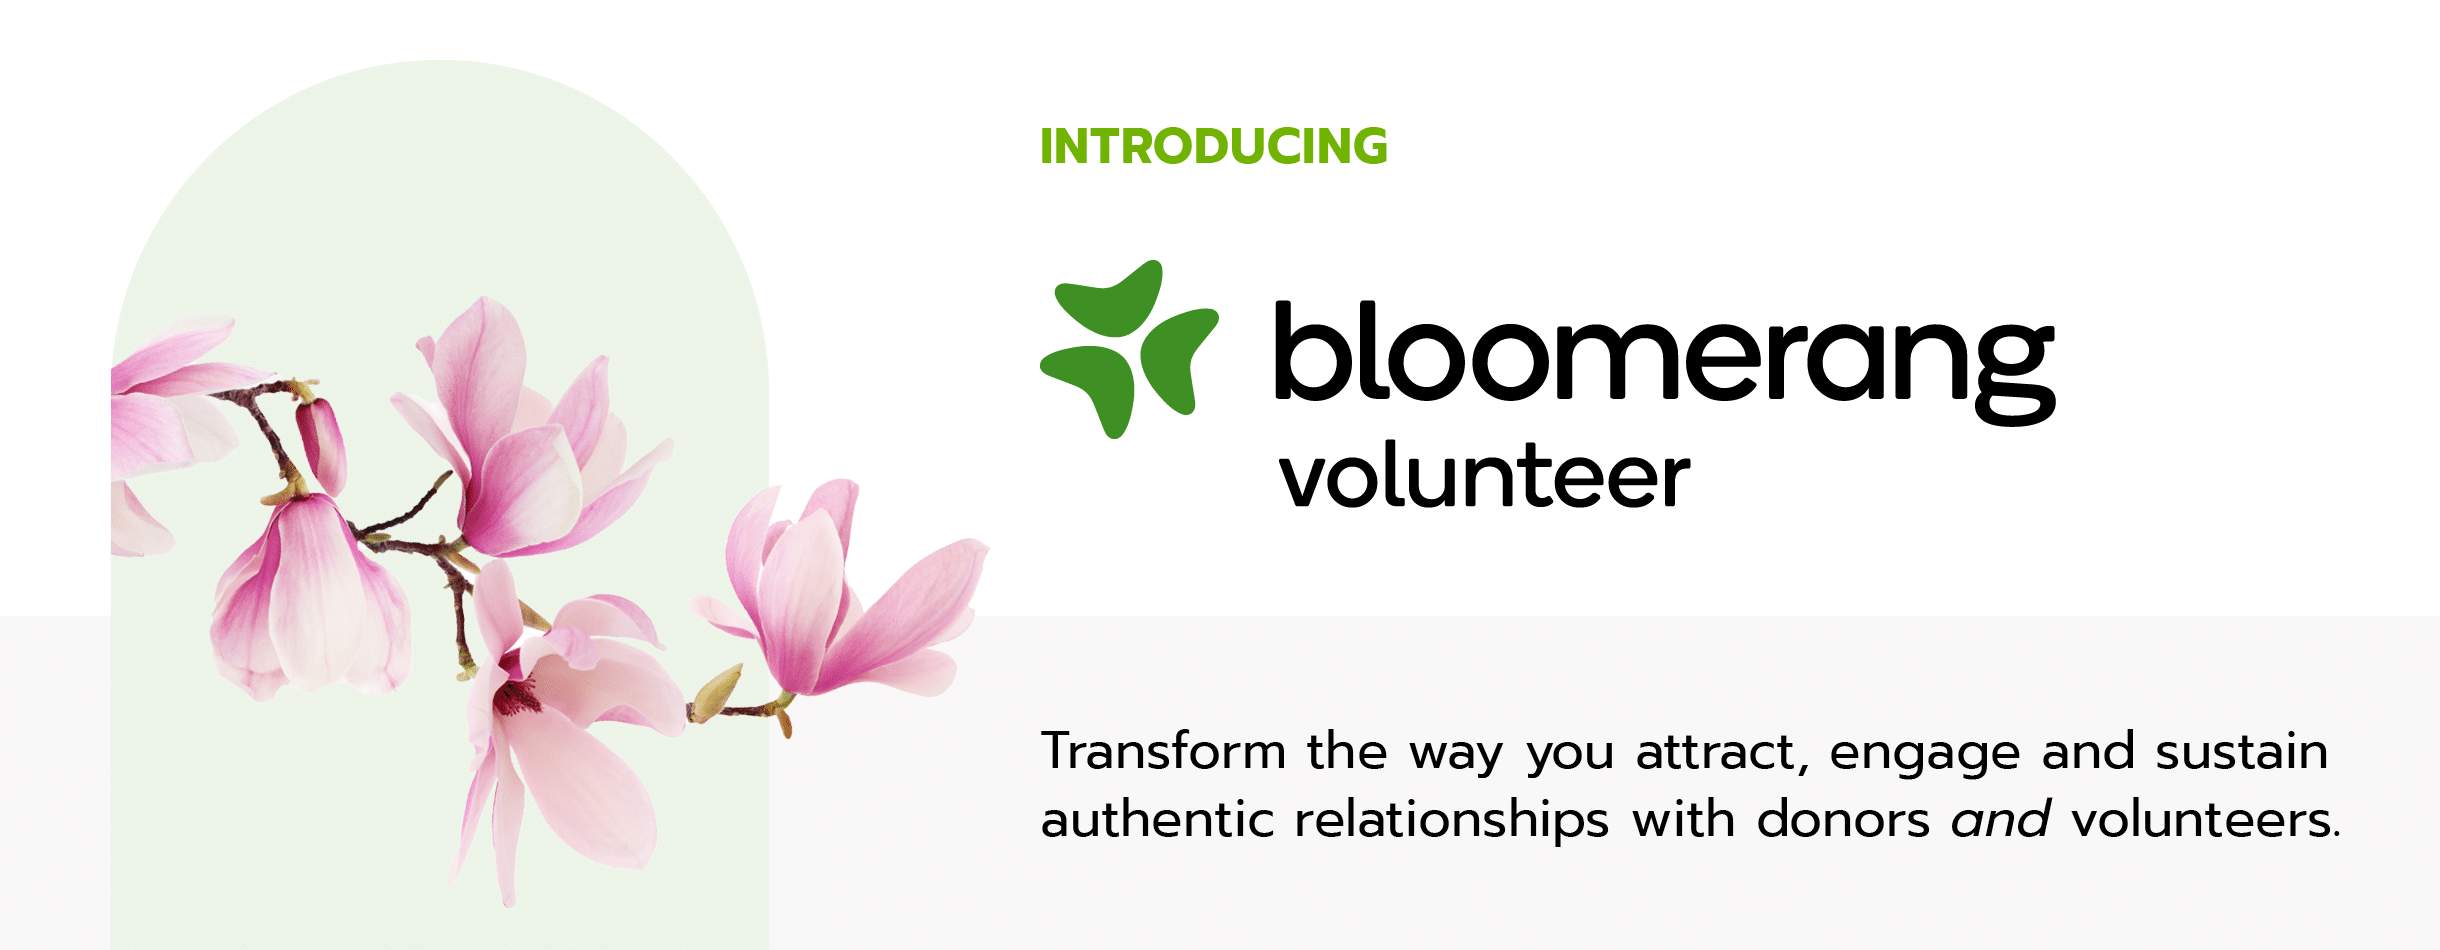 Bloomerang Launches Bloomerang Volunteer to Expand Nonprofits’ Relationships with Supporters